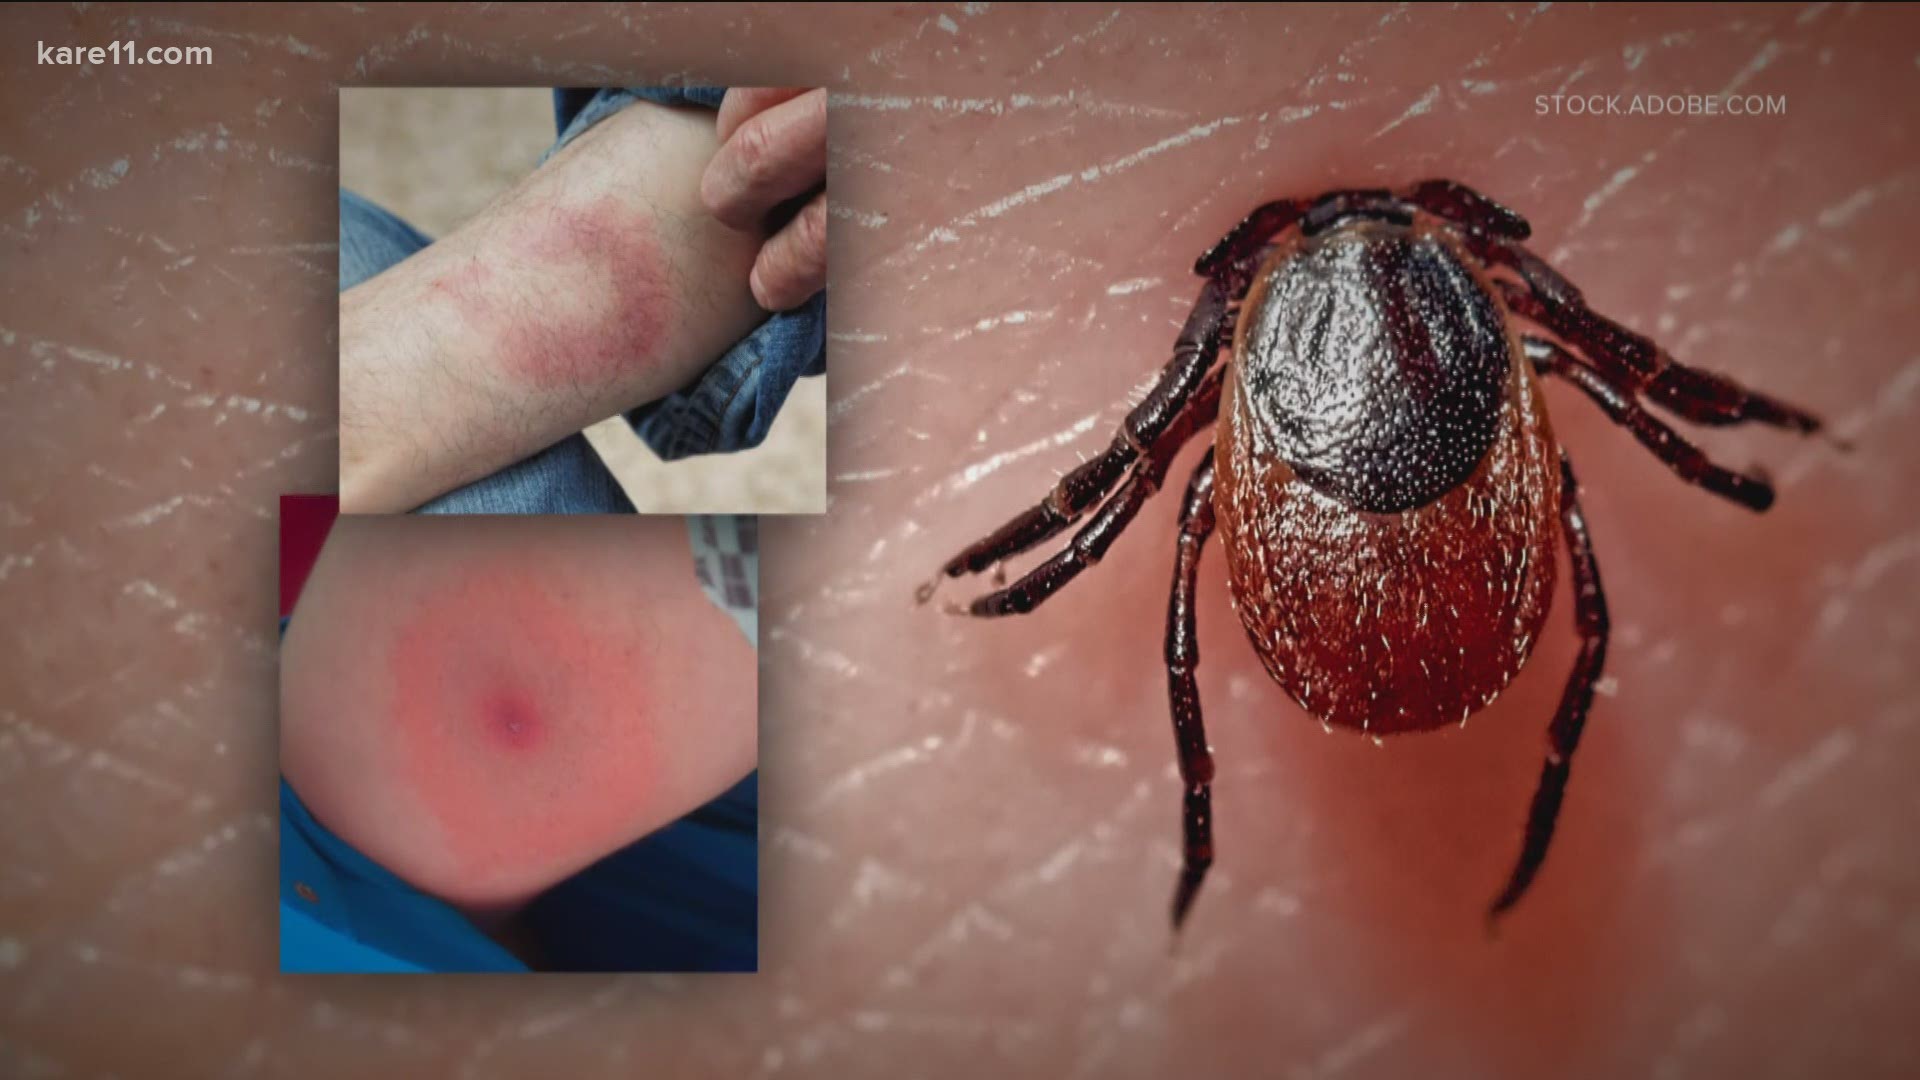 A firefighter went into cardiac arrest, that turned out to be Lyme Disease. Now he's warning others about the dangers.